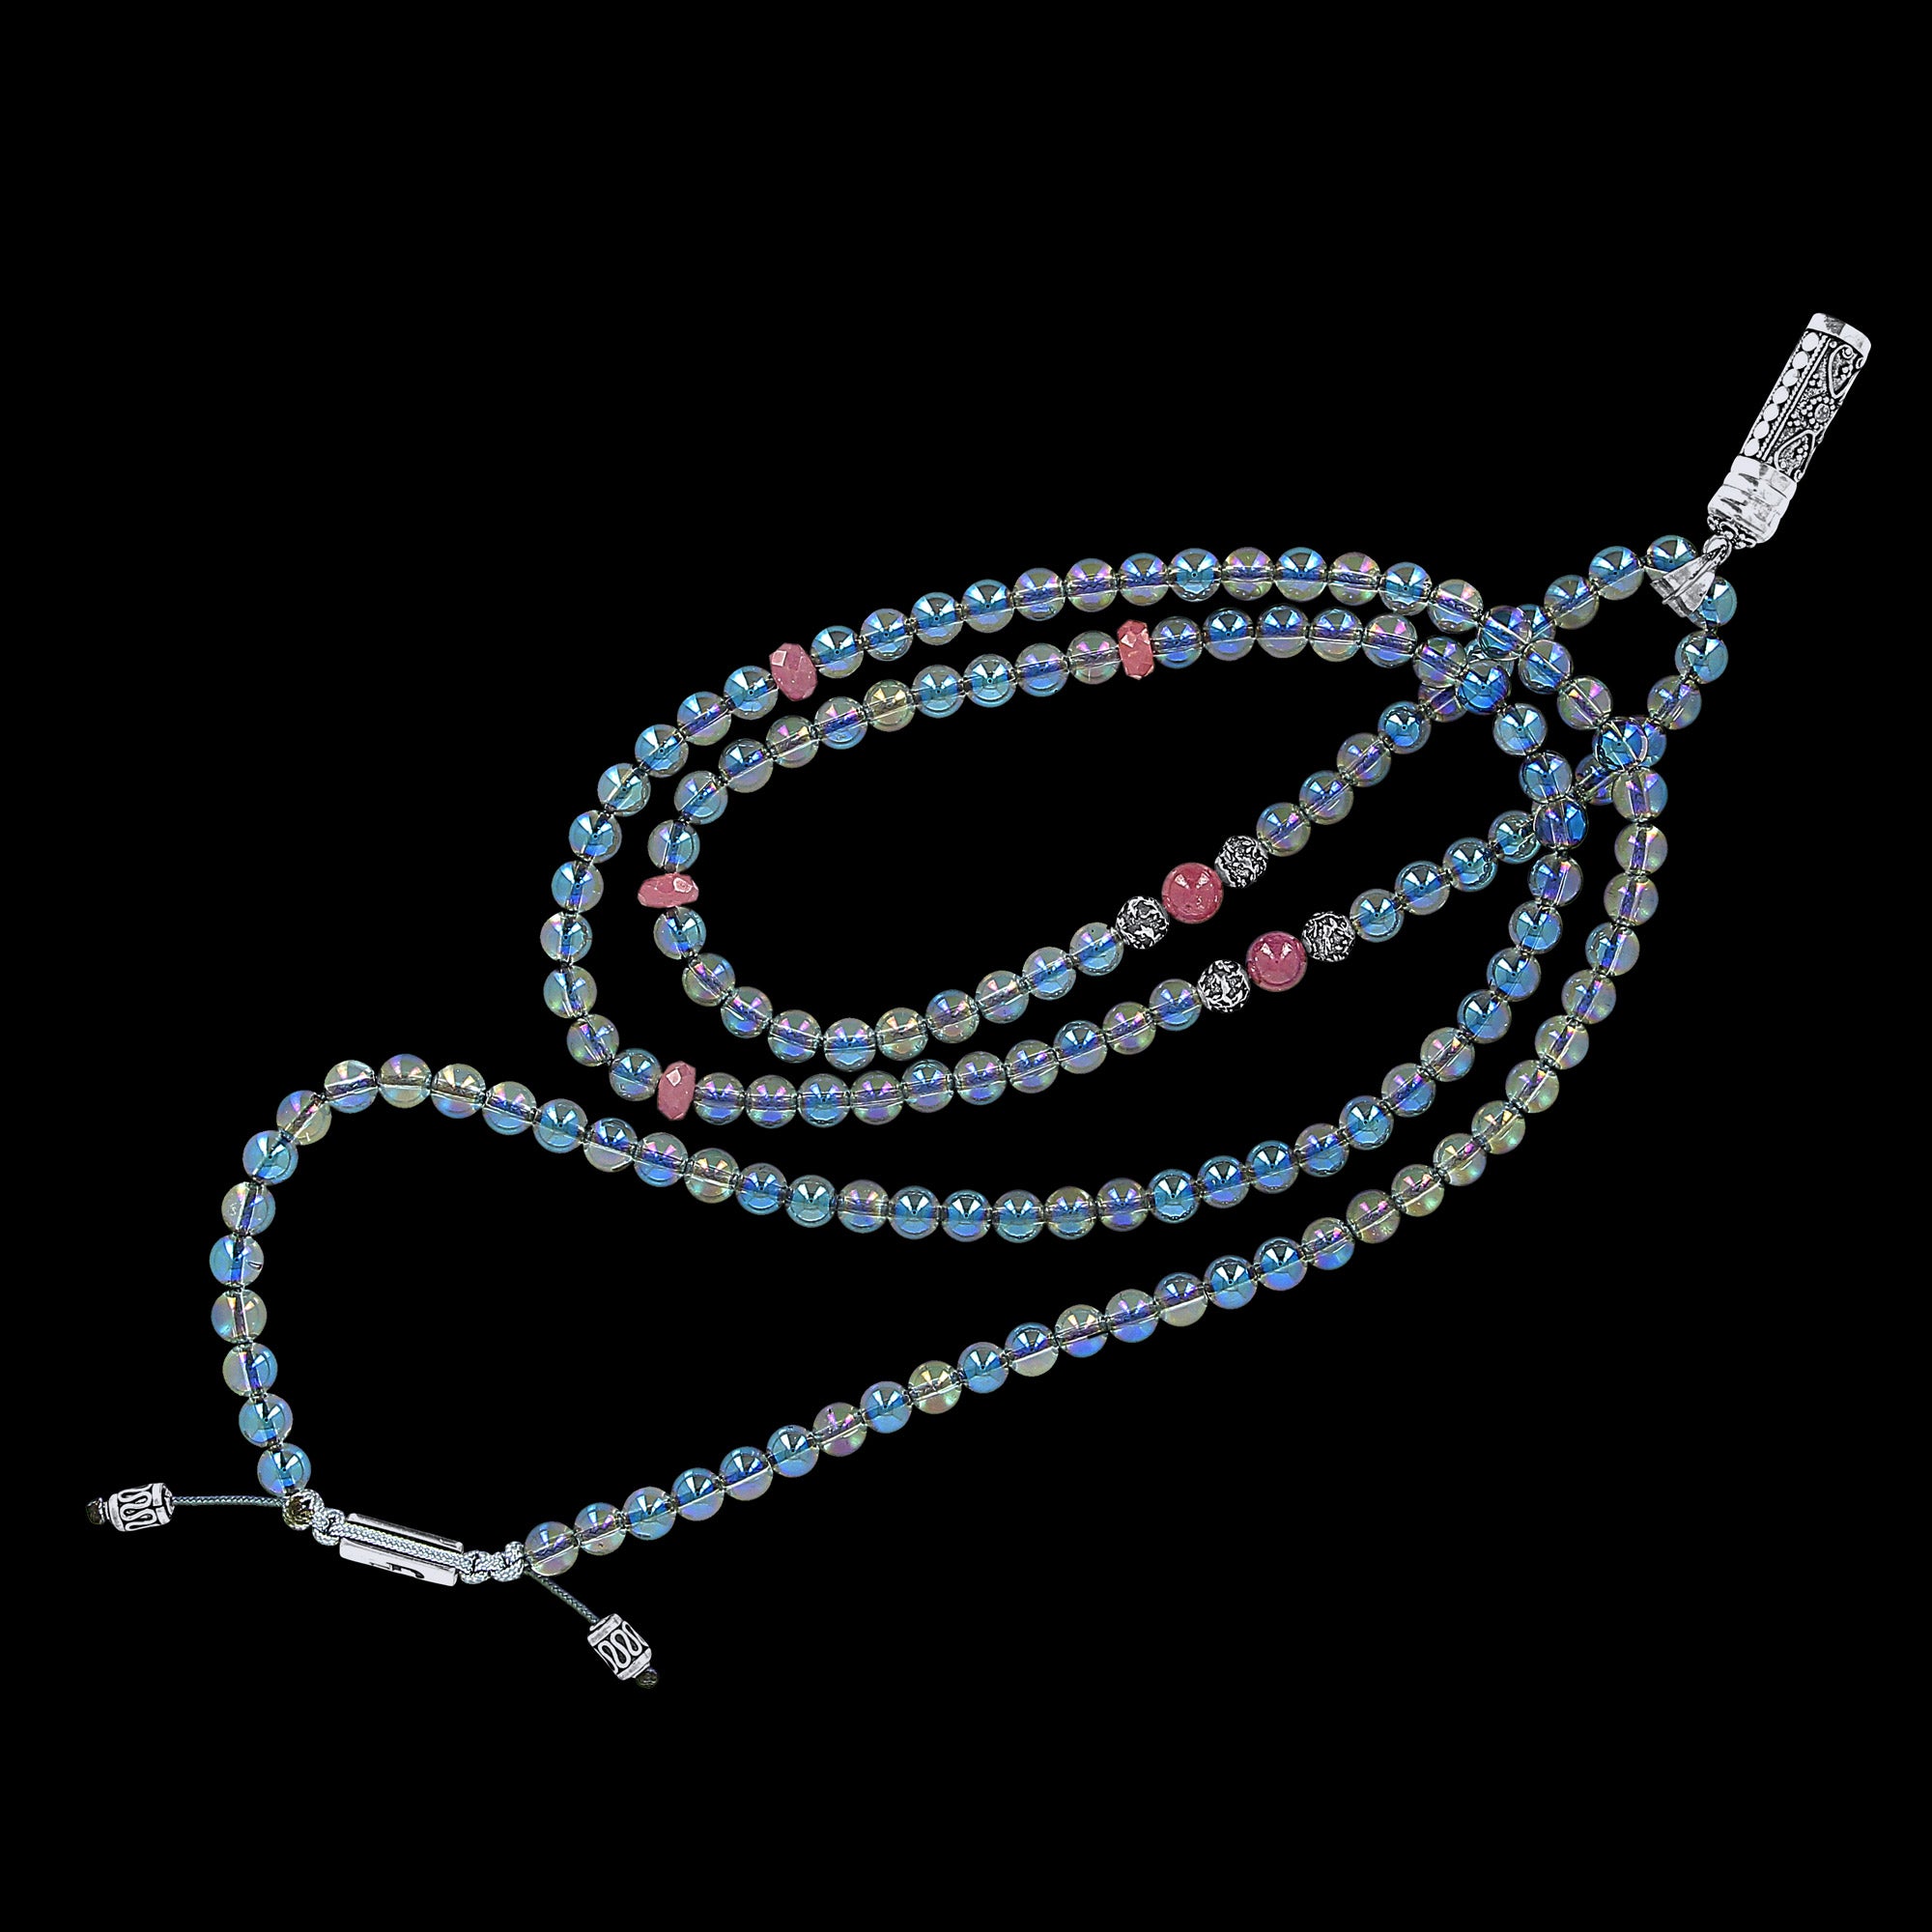 Parthenope - Long necklace in blue crystal quartz and rubies with prayer box